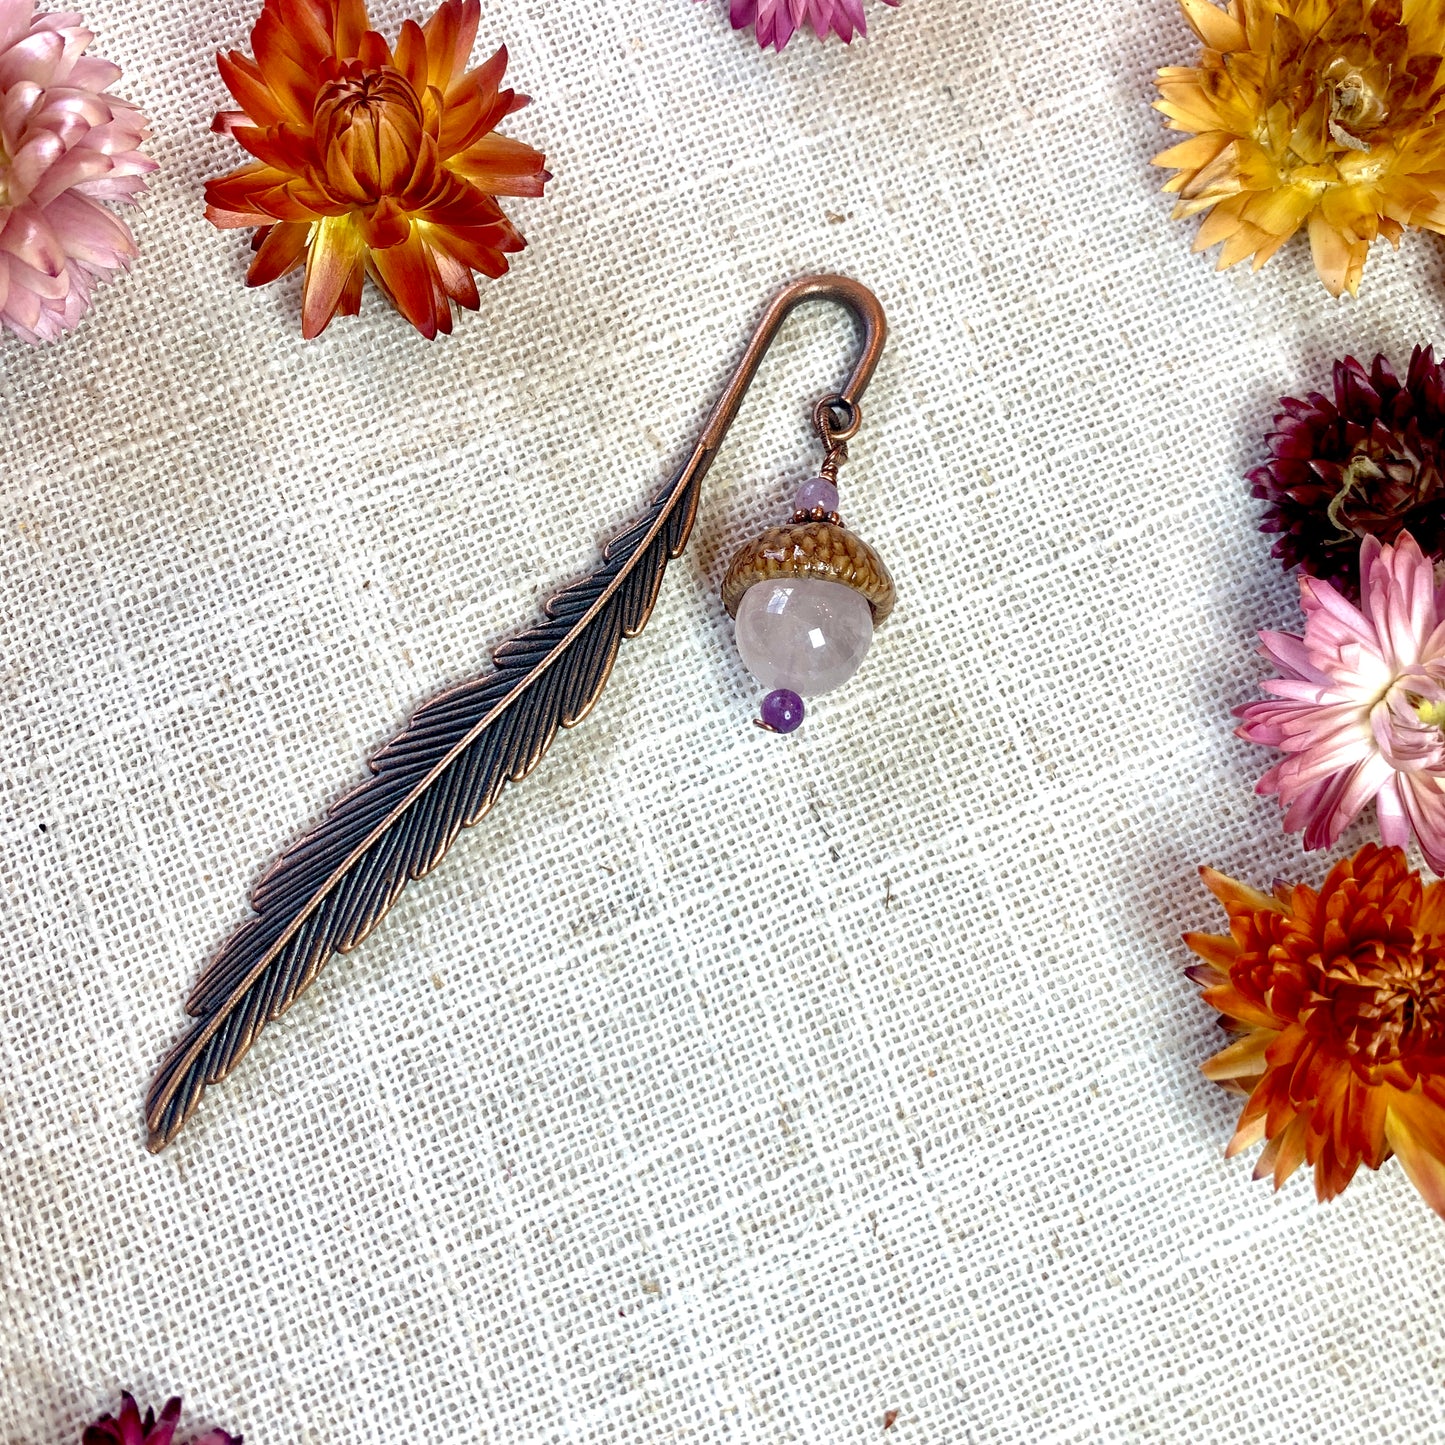 a close up of a pair of scissors near flowers